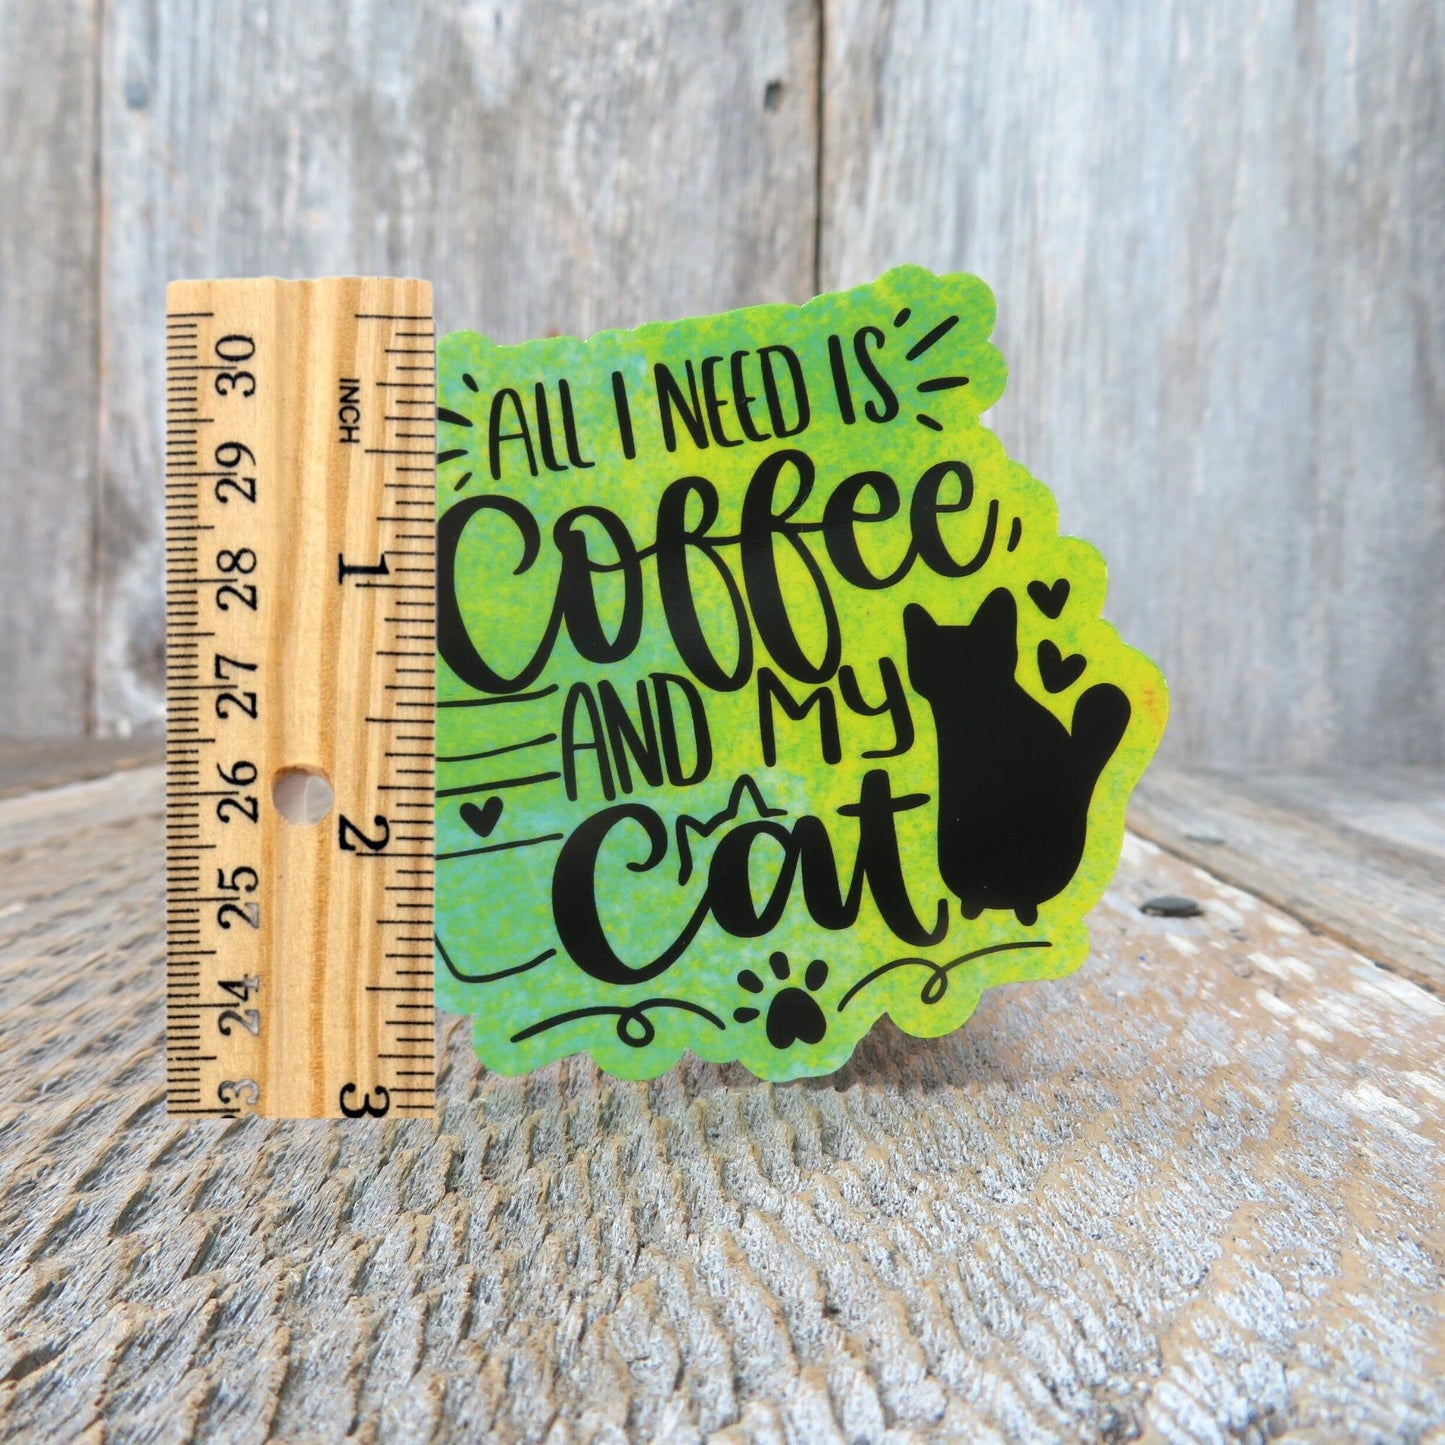 All I Need Is Coffee  and My Cat Sticker Green Blue Cat Lover Anti-Social